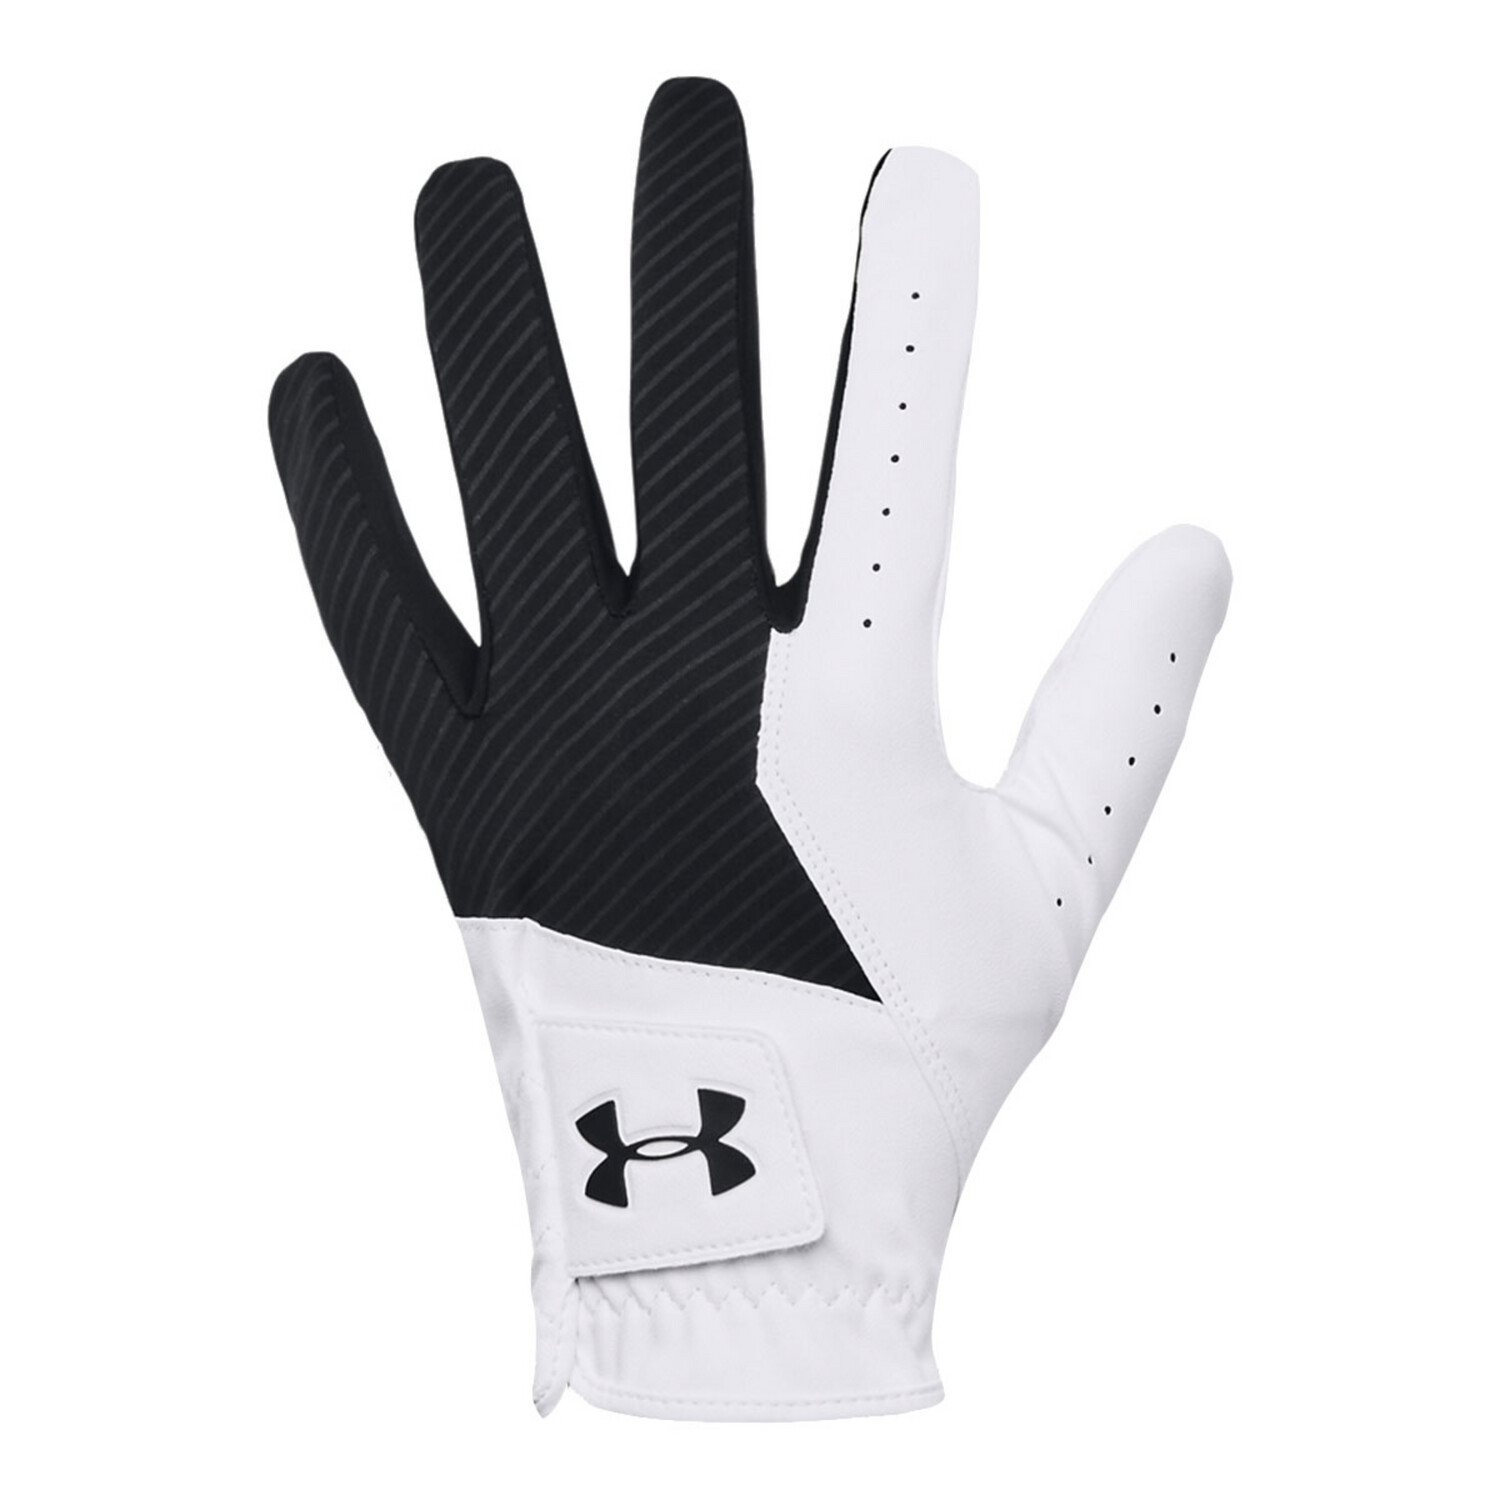 Under Armour Men's Medal Golf Glove, Hand: Right Hand, Size: S